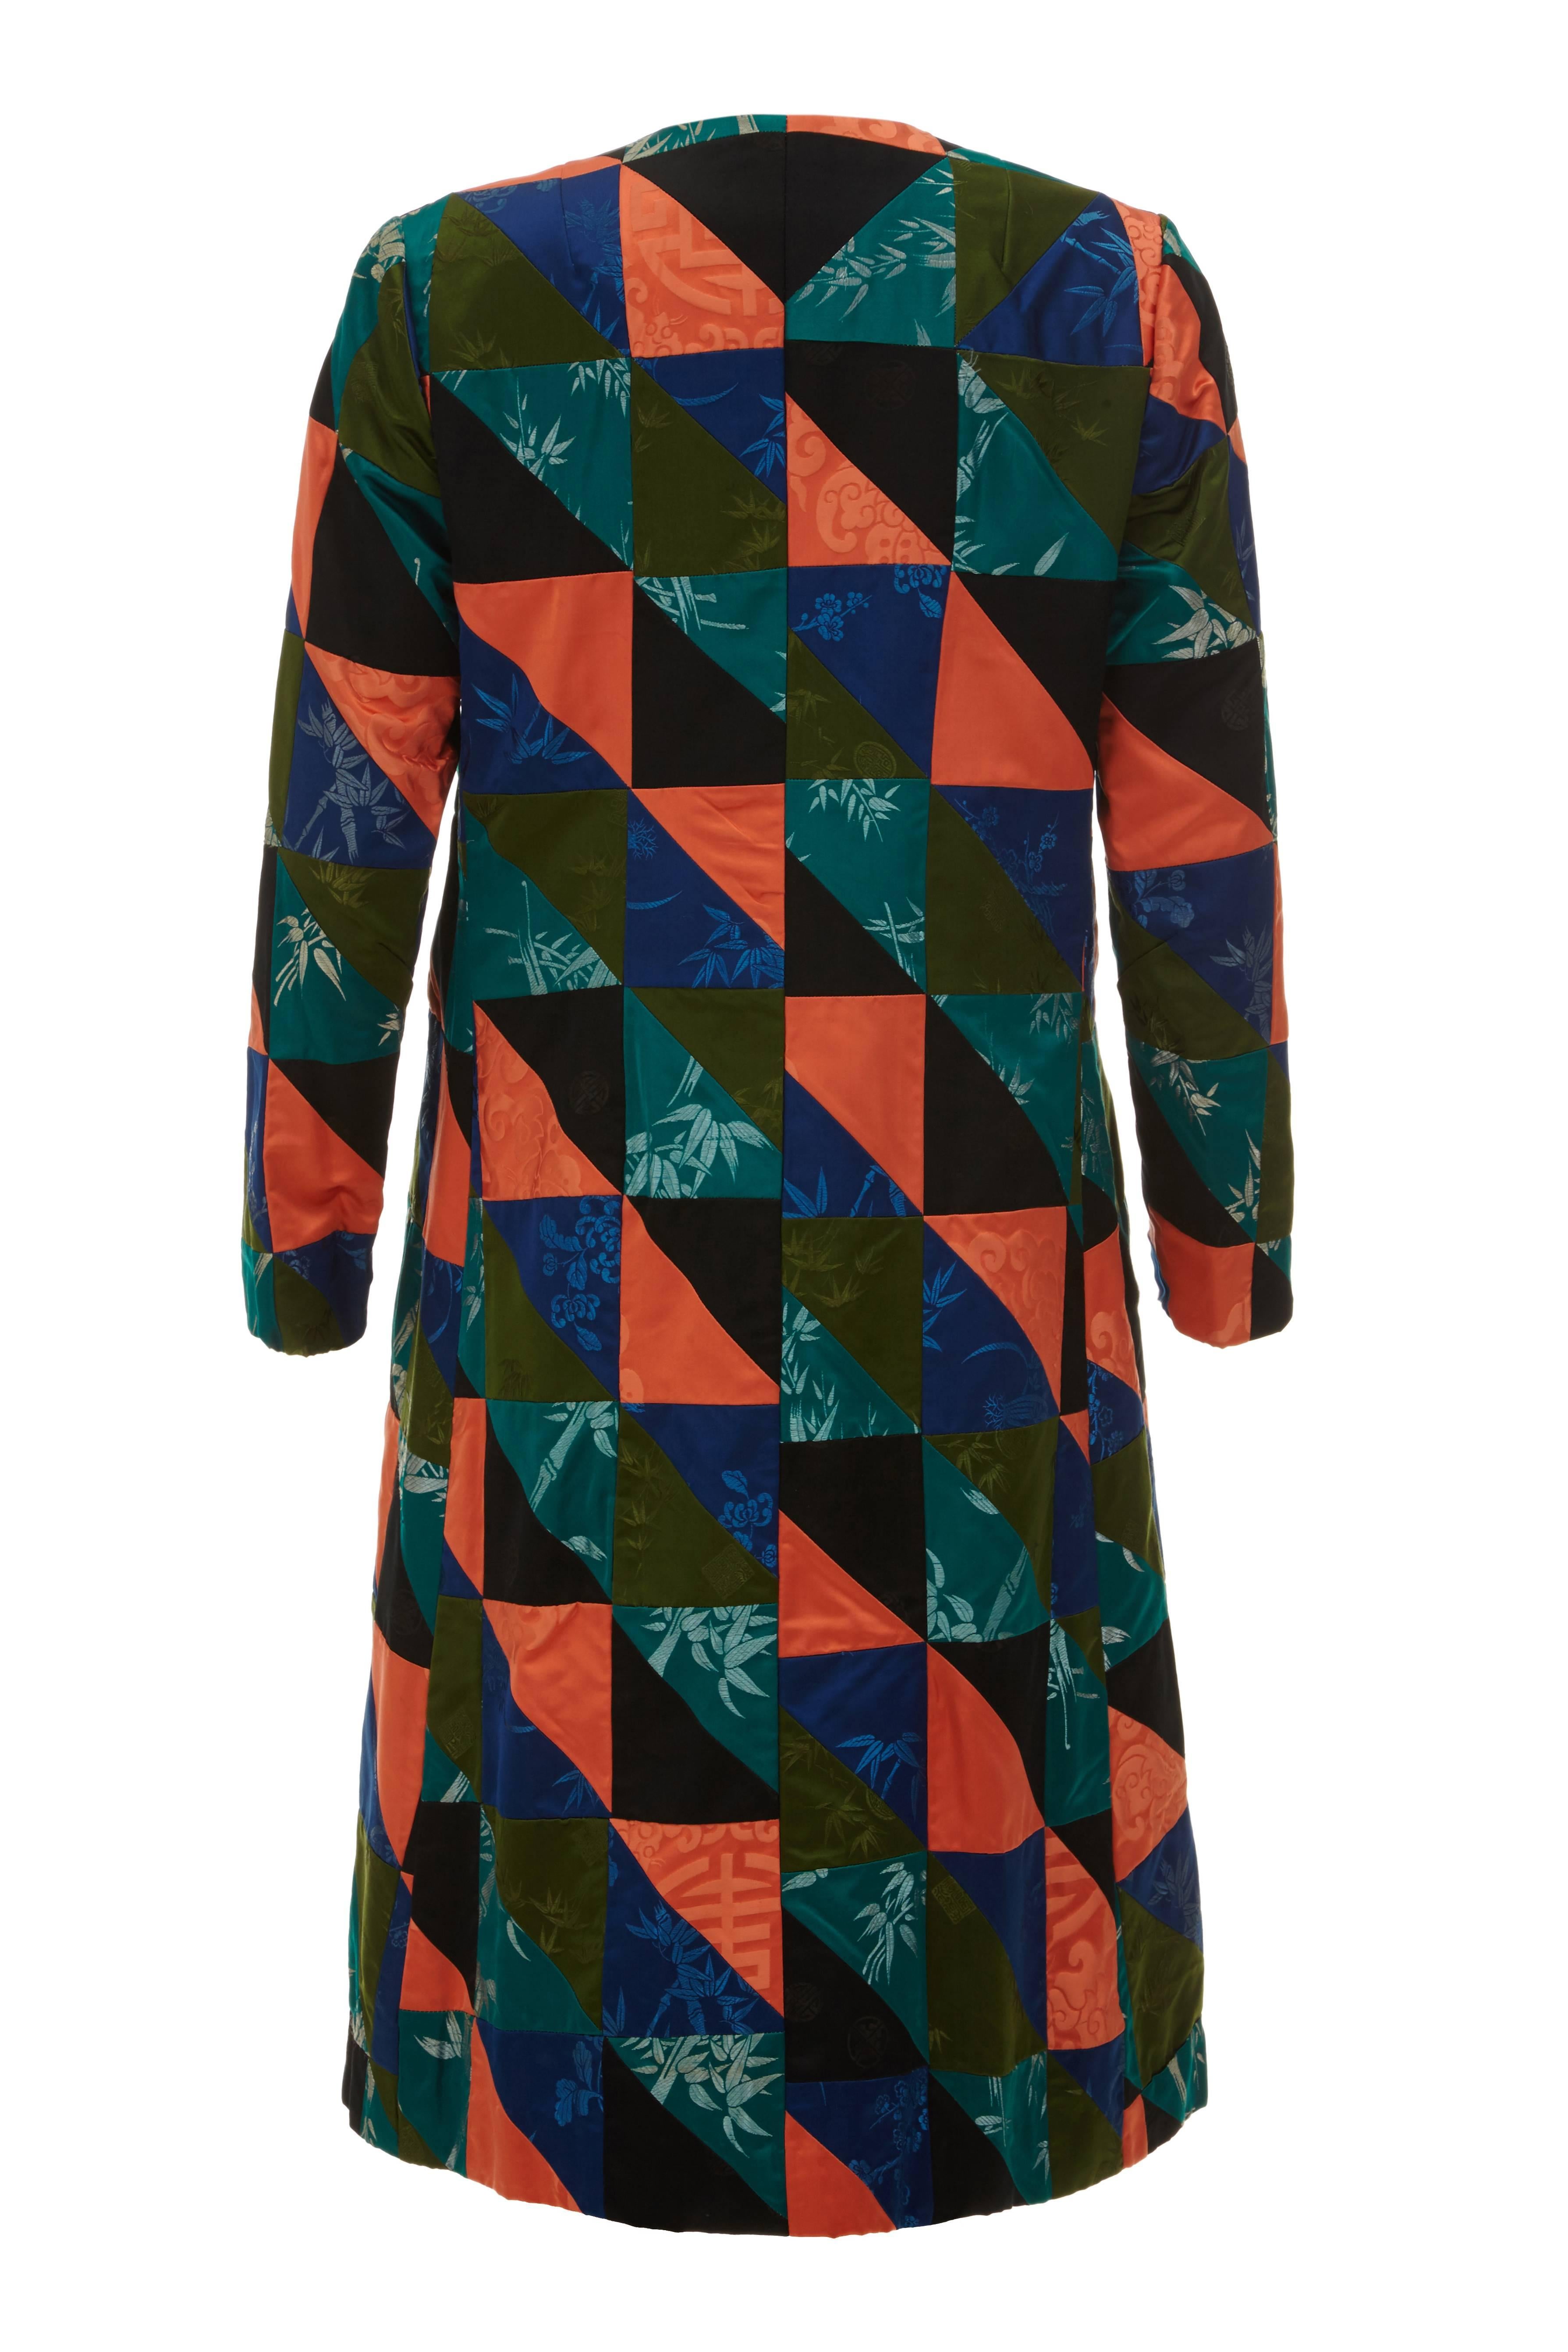 Stunning and original vintage 1960s A-line patchwork Chinese silk coat. This duster coat is very unusual and is entirely made from a repeat pattern of imported Chinese silk fabrics in black, greens, blue and orange.  The silk jacquard fabrics each